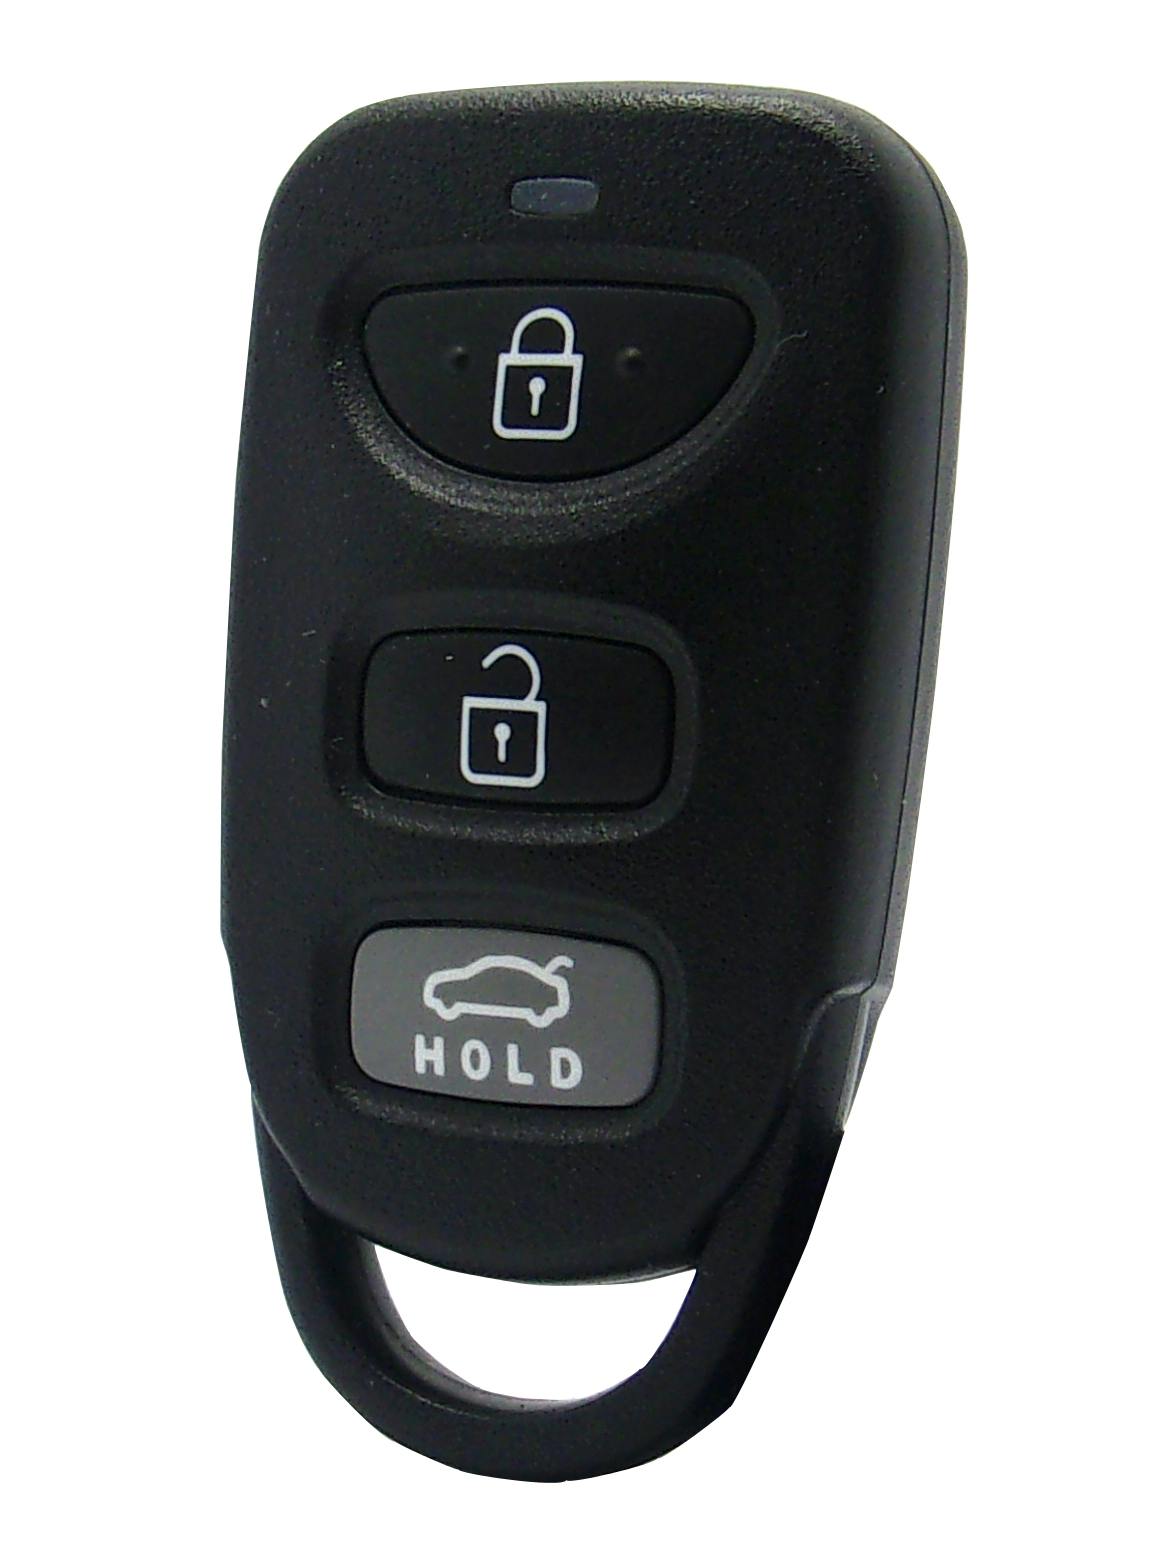 Hyundai Keyless Entry Remote - 4 Button with Trunk for 2018